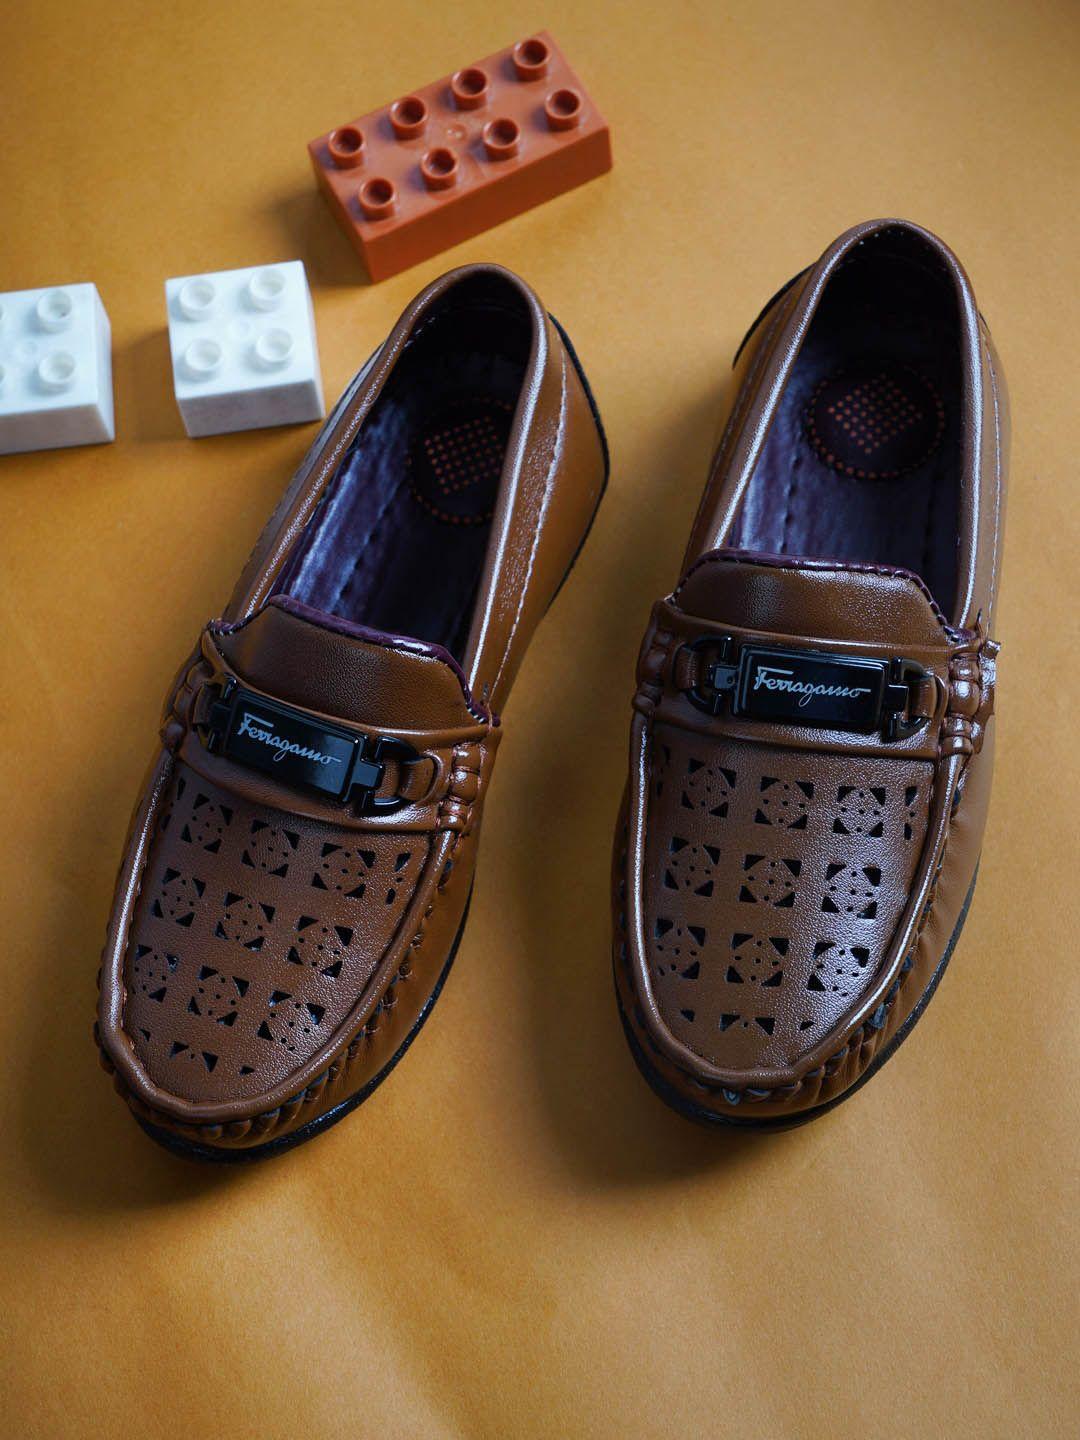 style shoes boys brown textured lightweight loafers